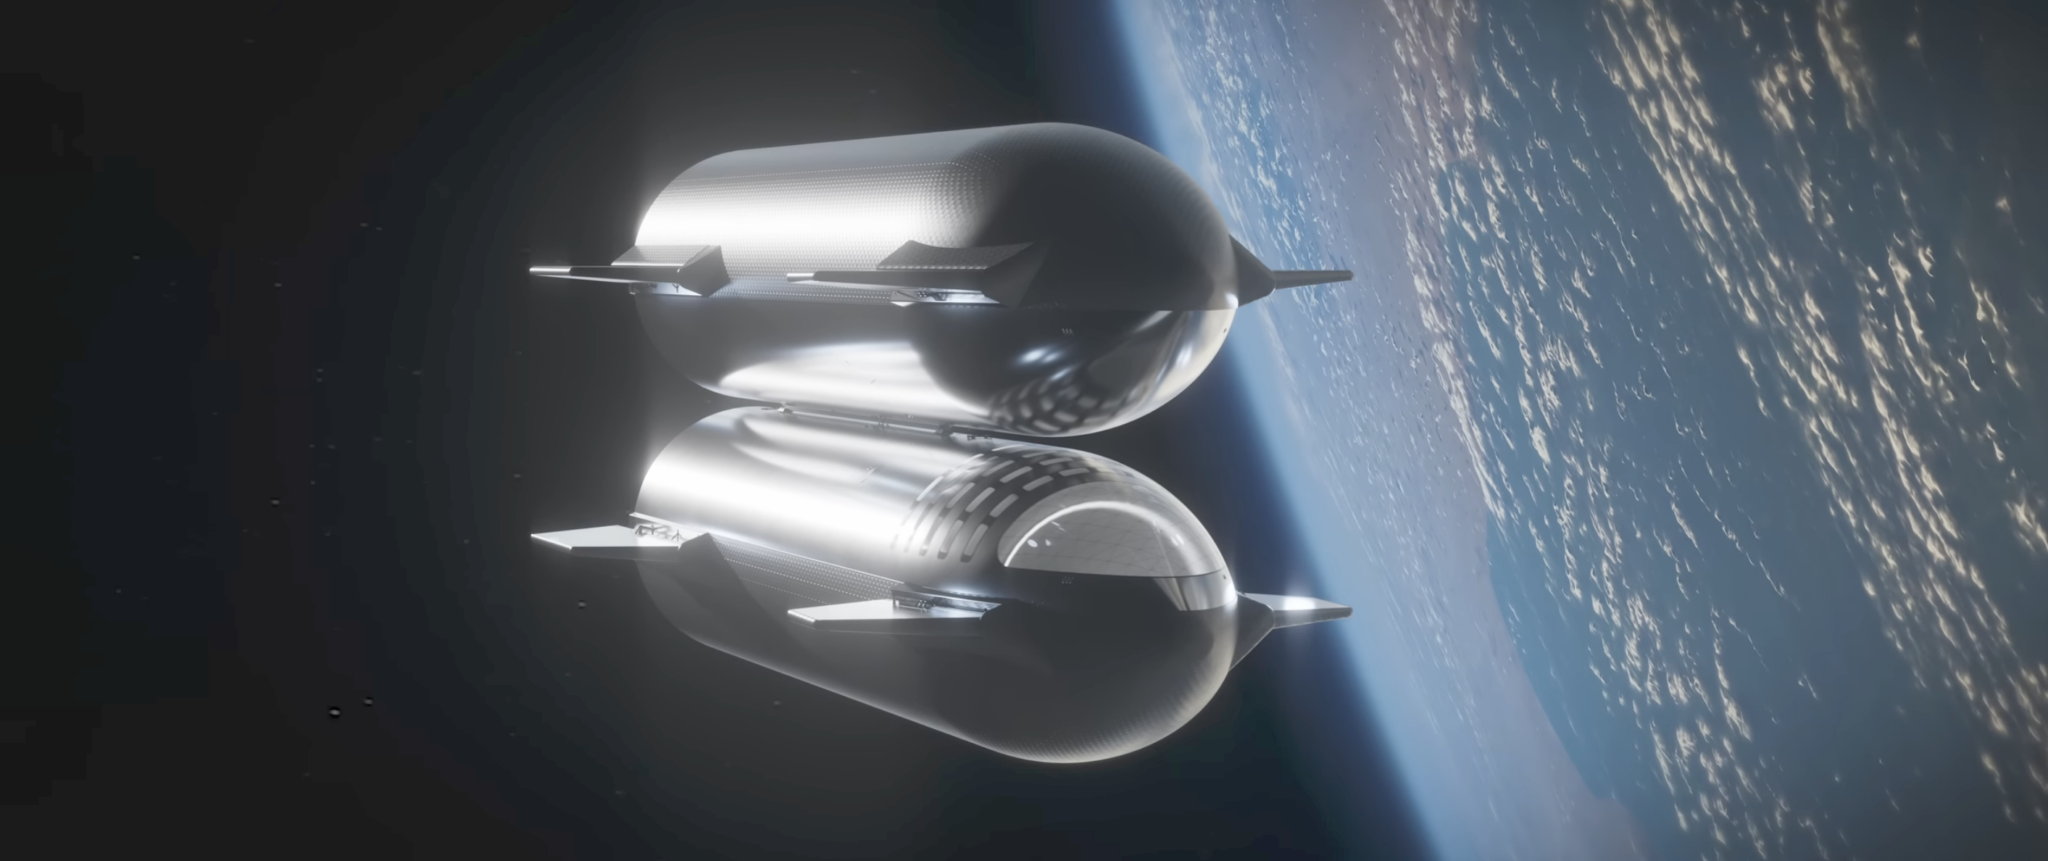 SPACEX-STARSHIP-TANK-SECOND-STAGE-2048x861.png